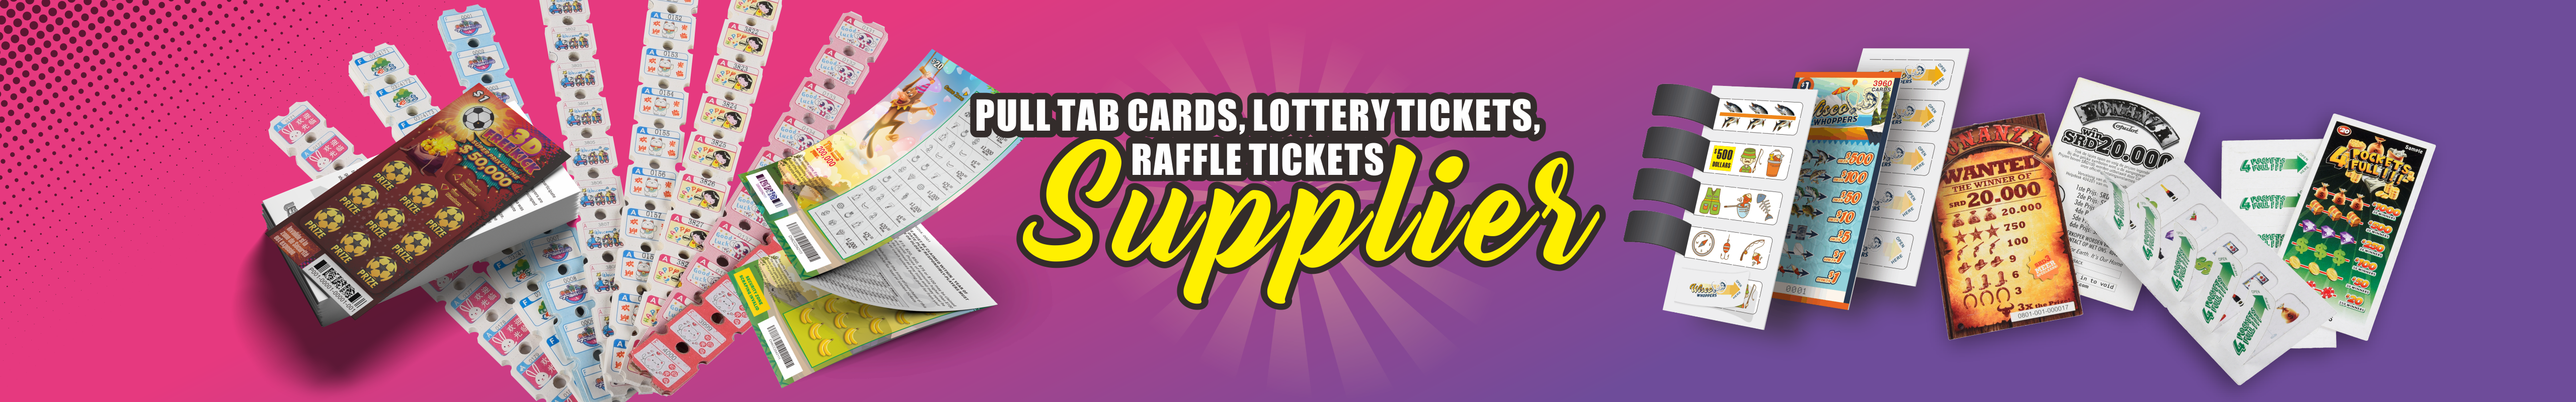 Custom Printing Of High-Quality Lottery Tickets